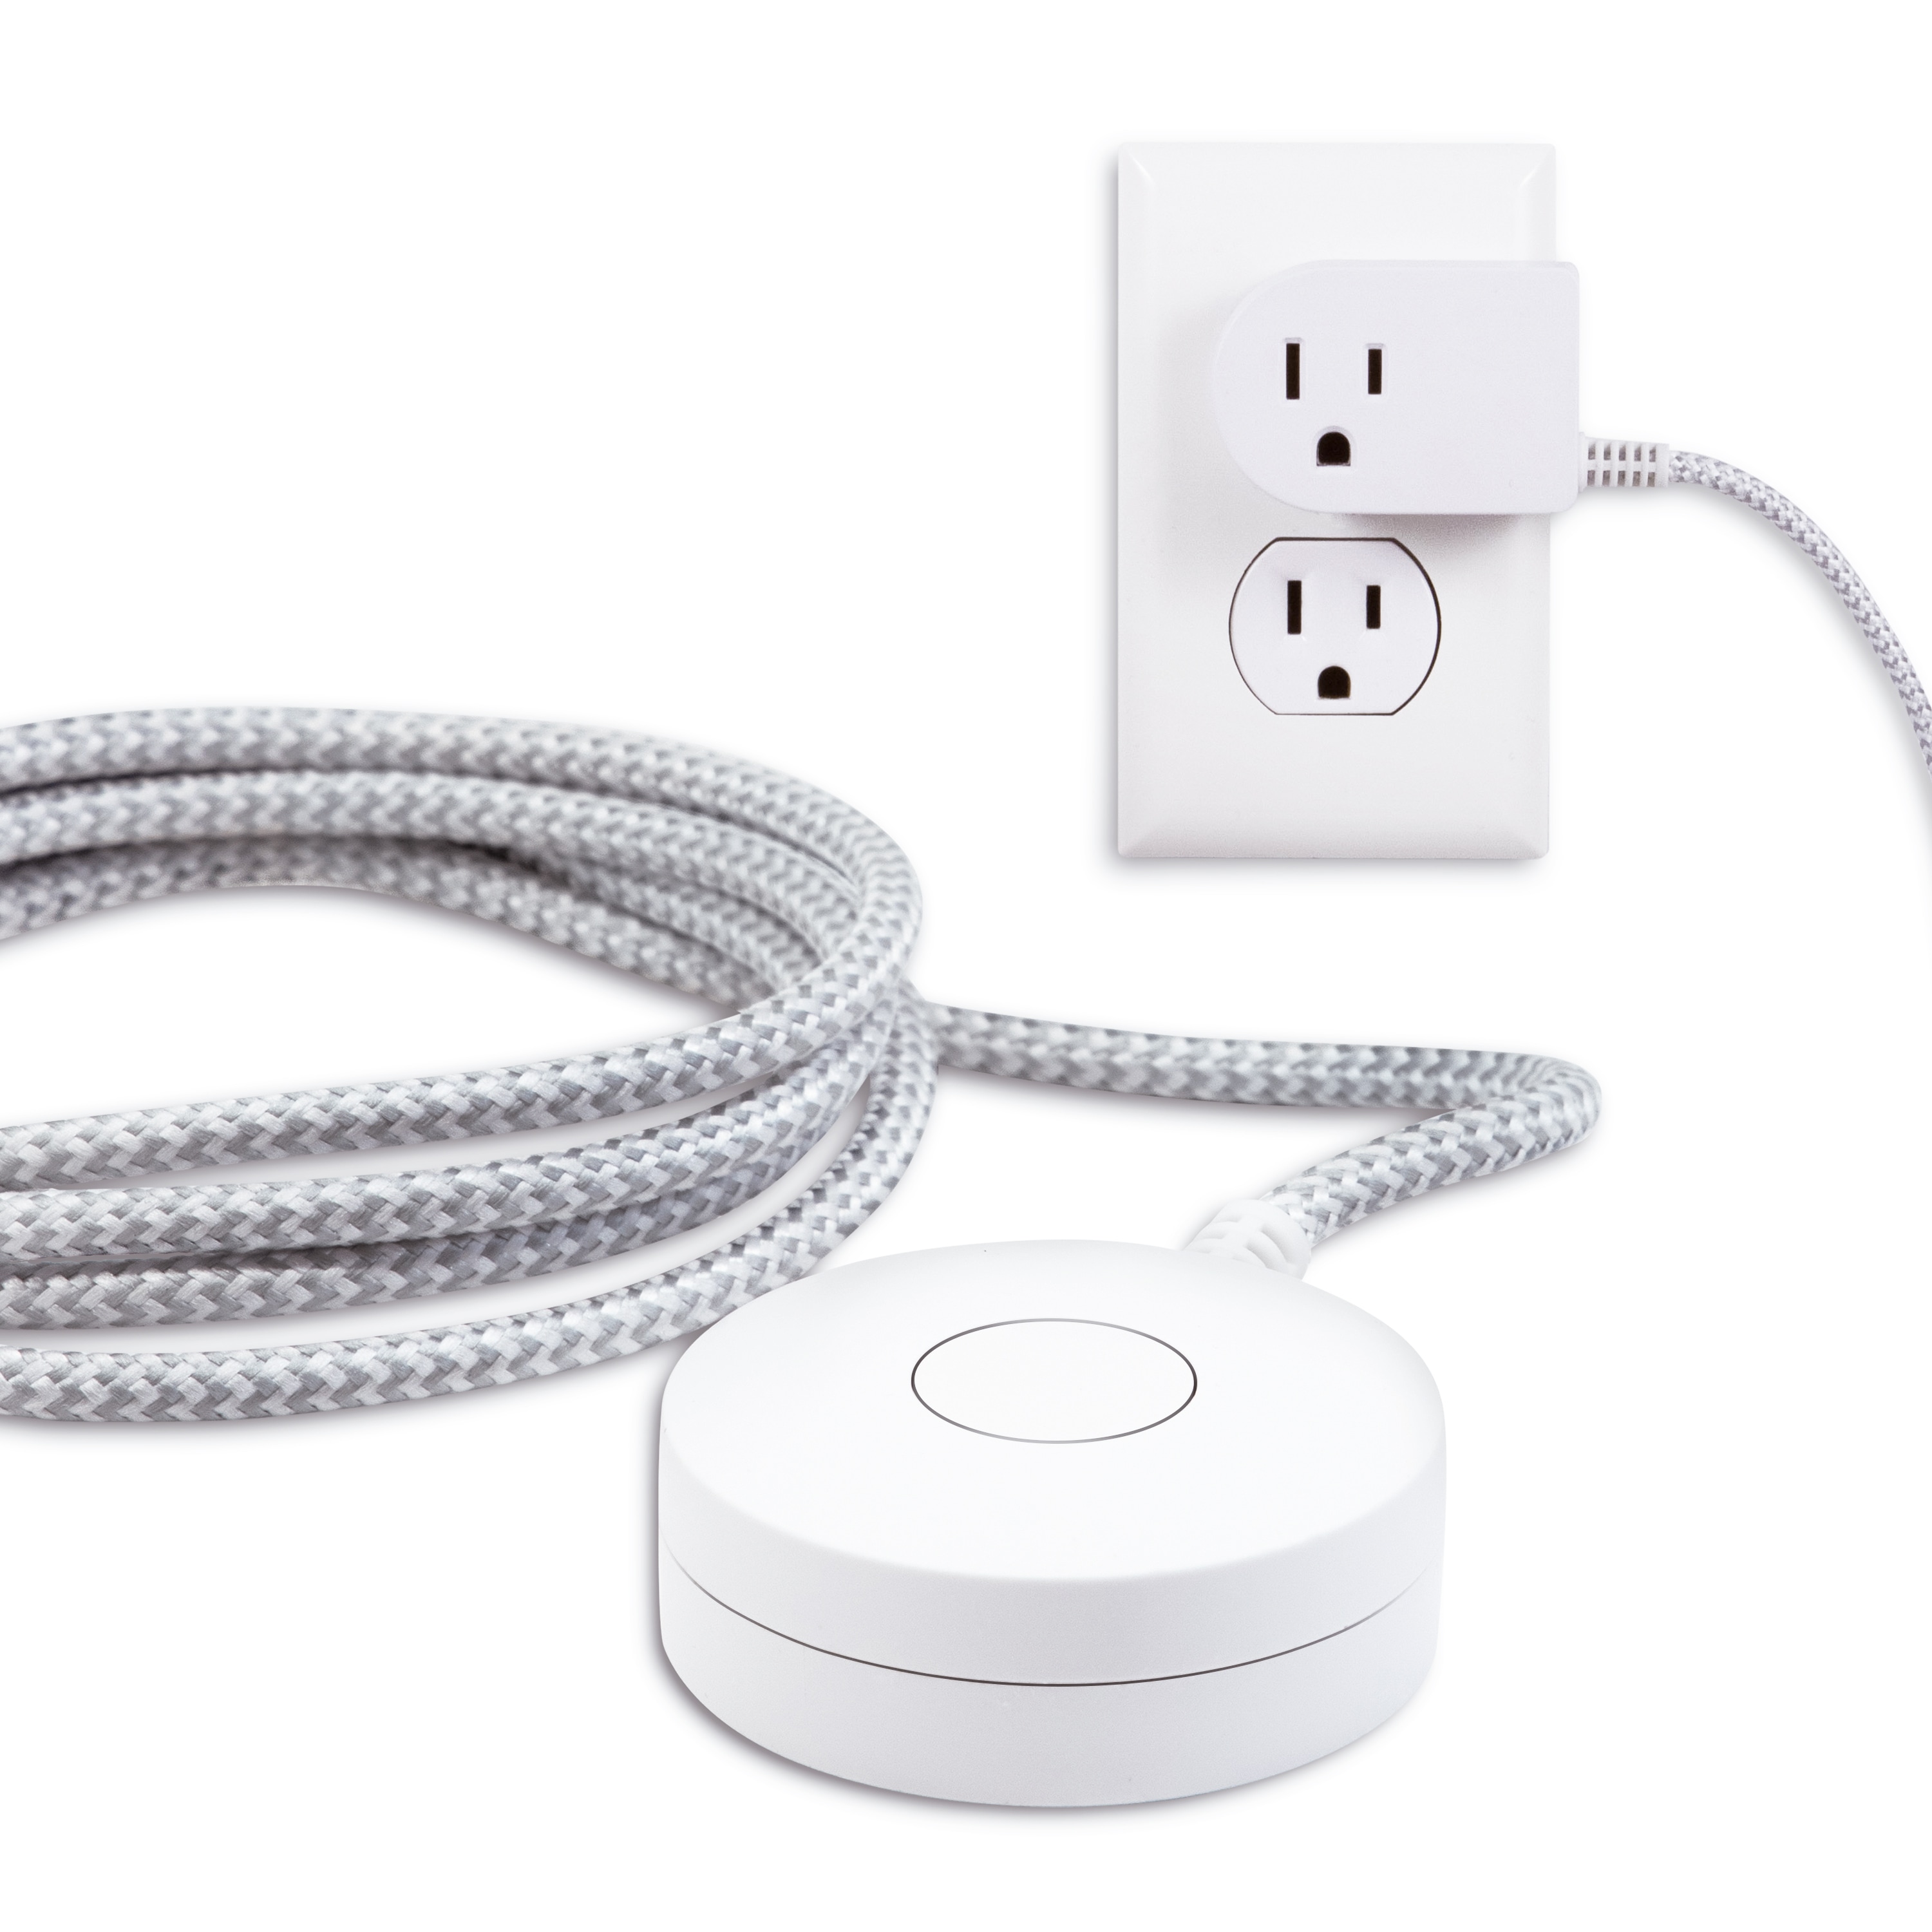 3 Outlet 2 Prong Indoor Light Wall Power Electrical Extension Cord Cable White 